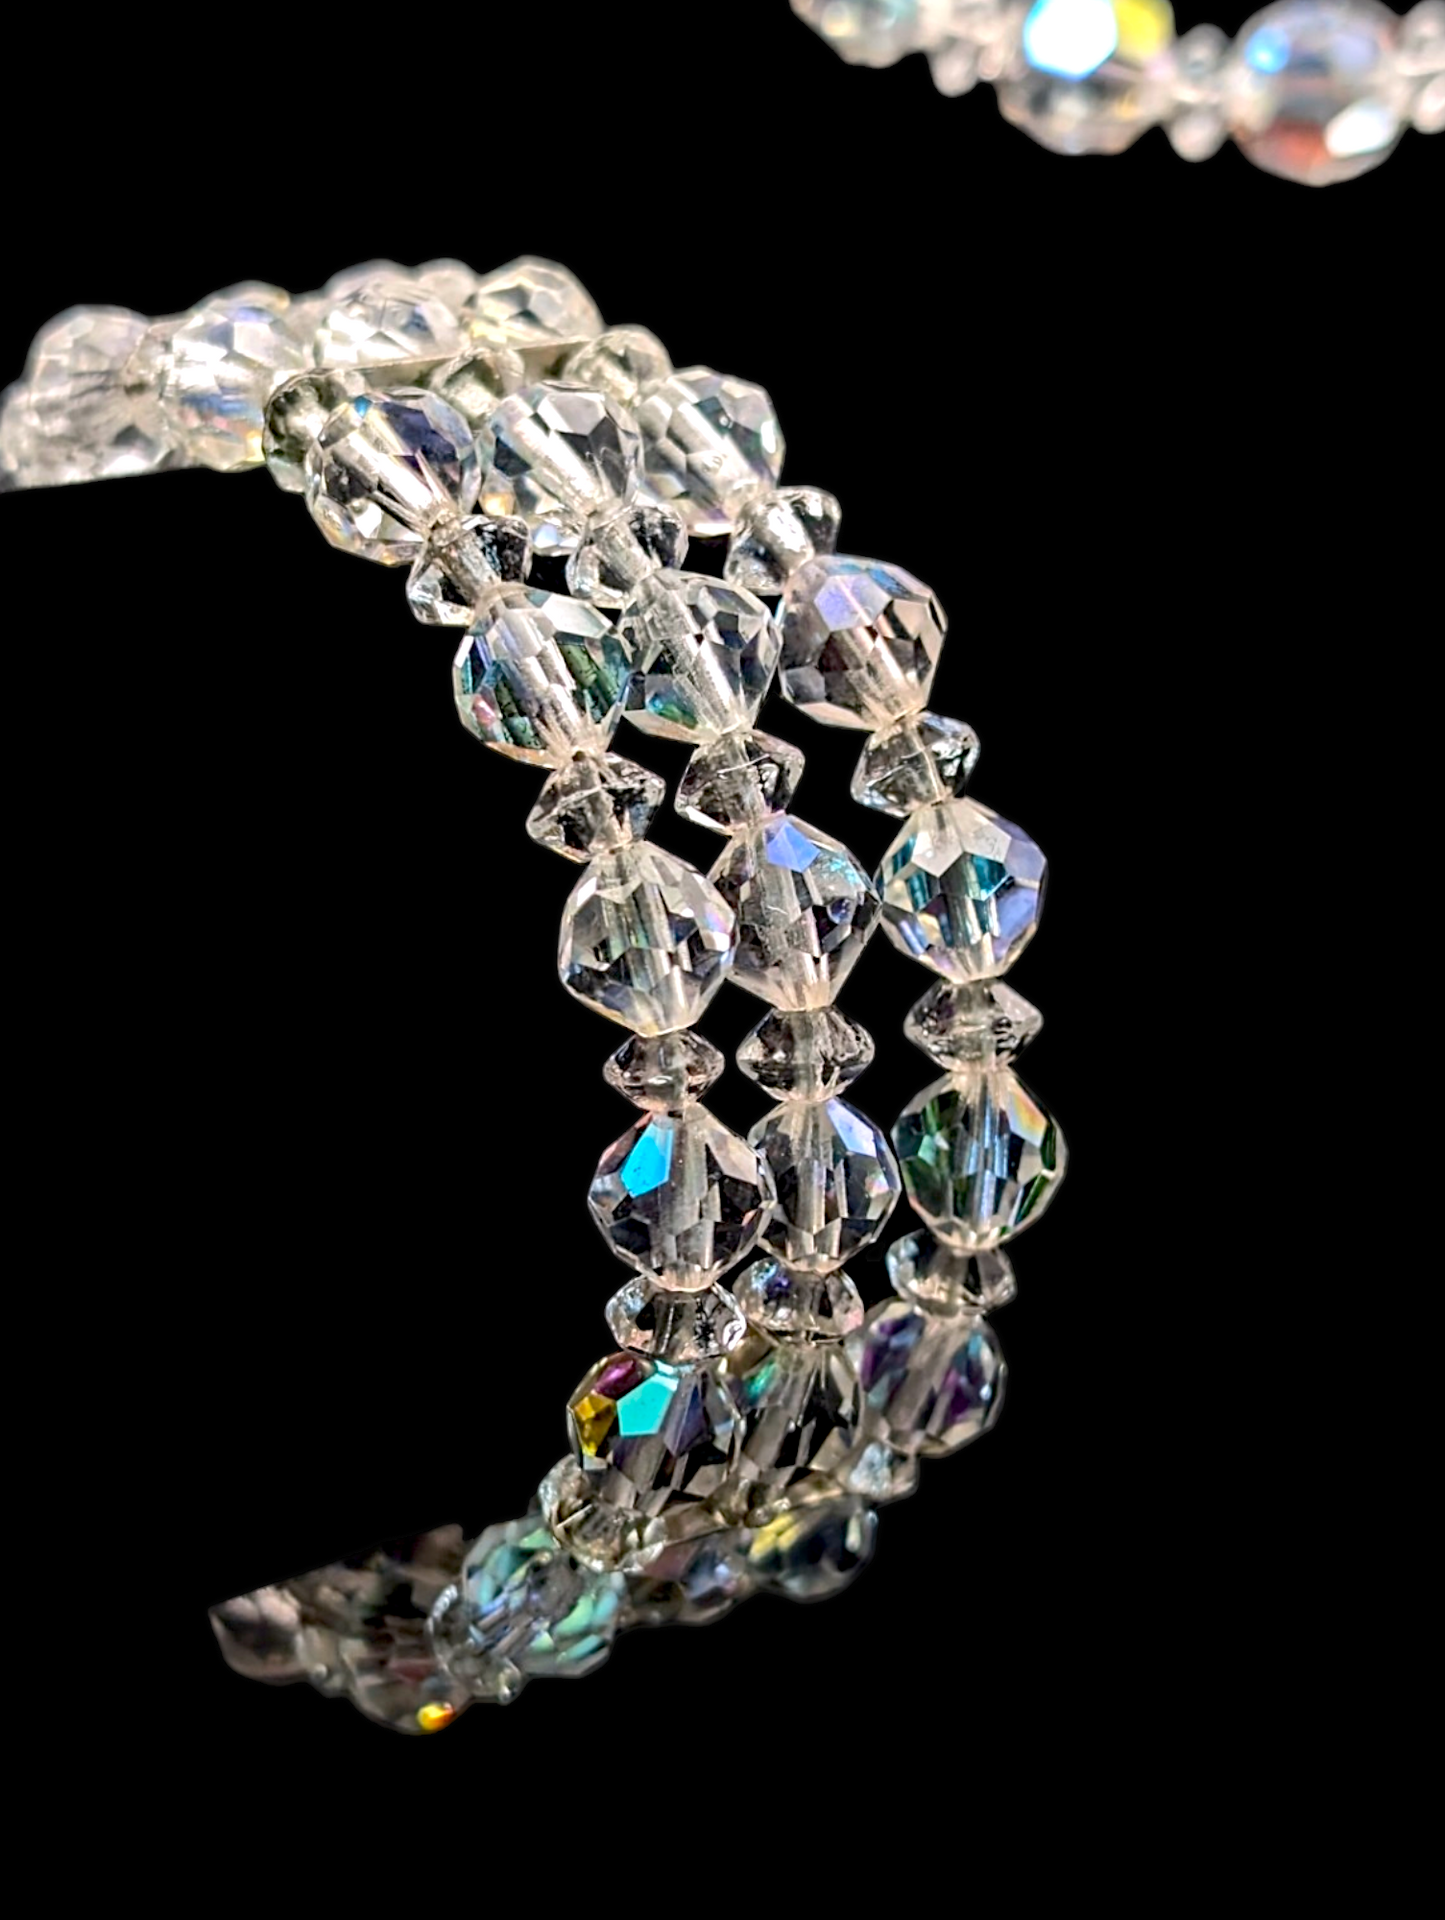 1950s 3 Piece Aurora Borealis Crystal 4 Strand Necklace, Earrings and Bracelet Set